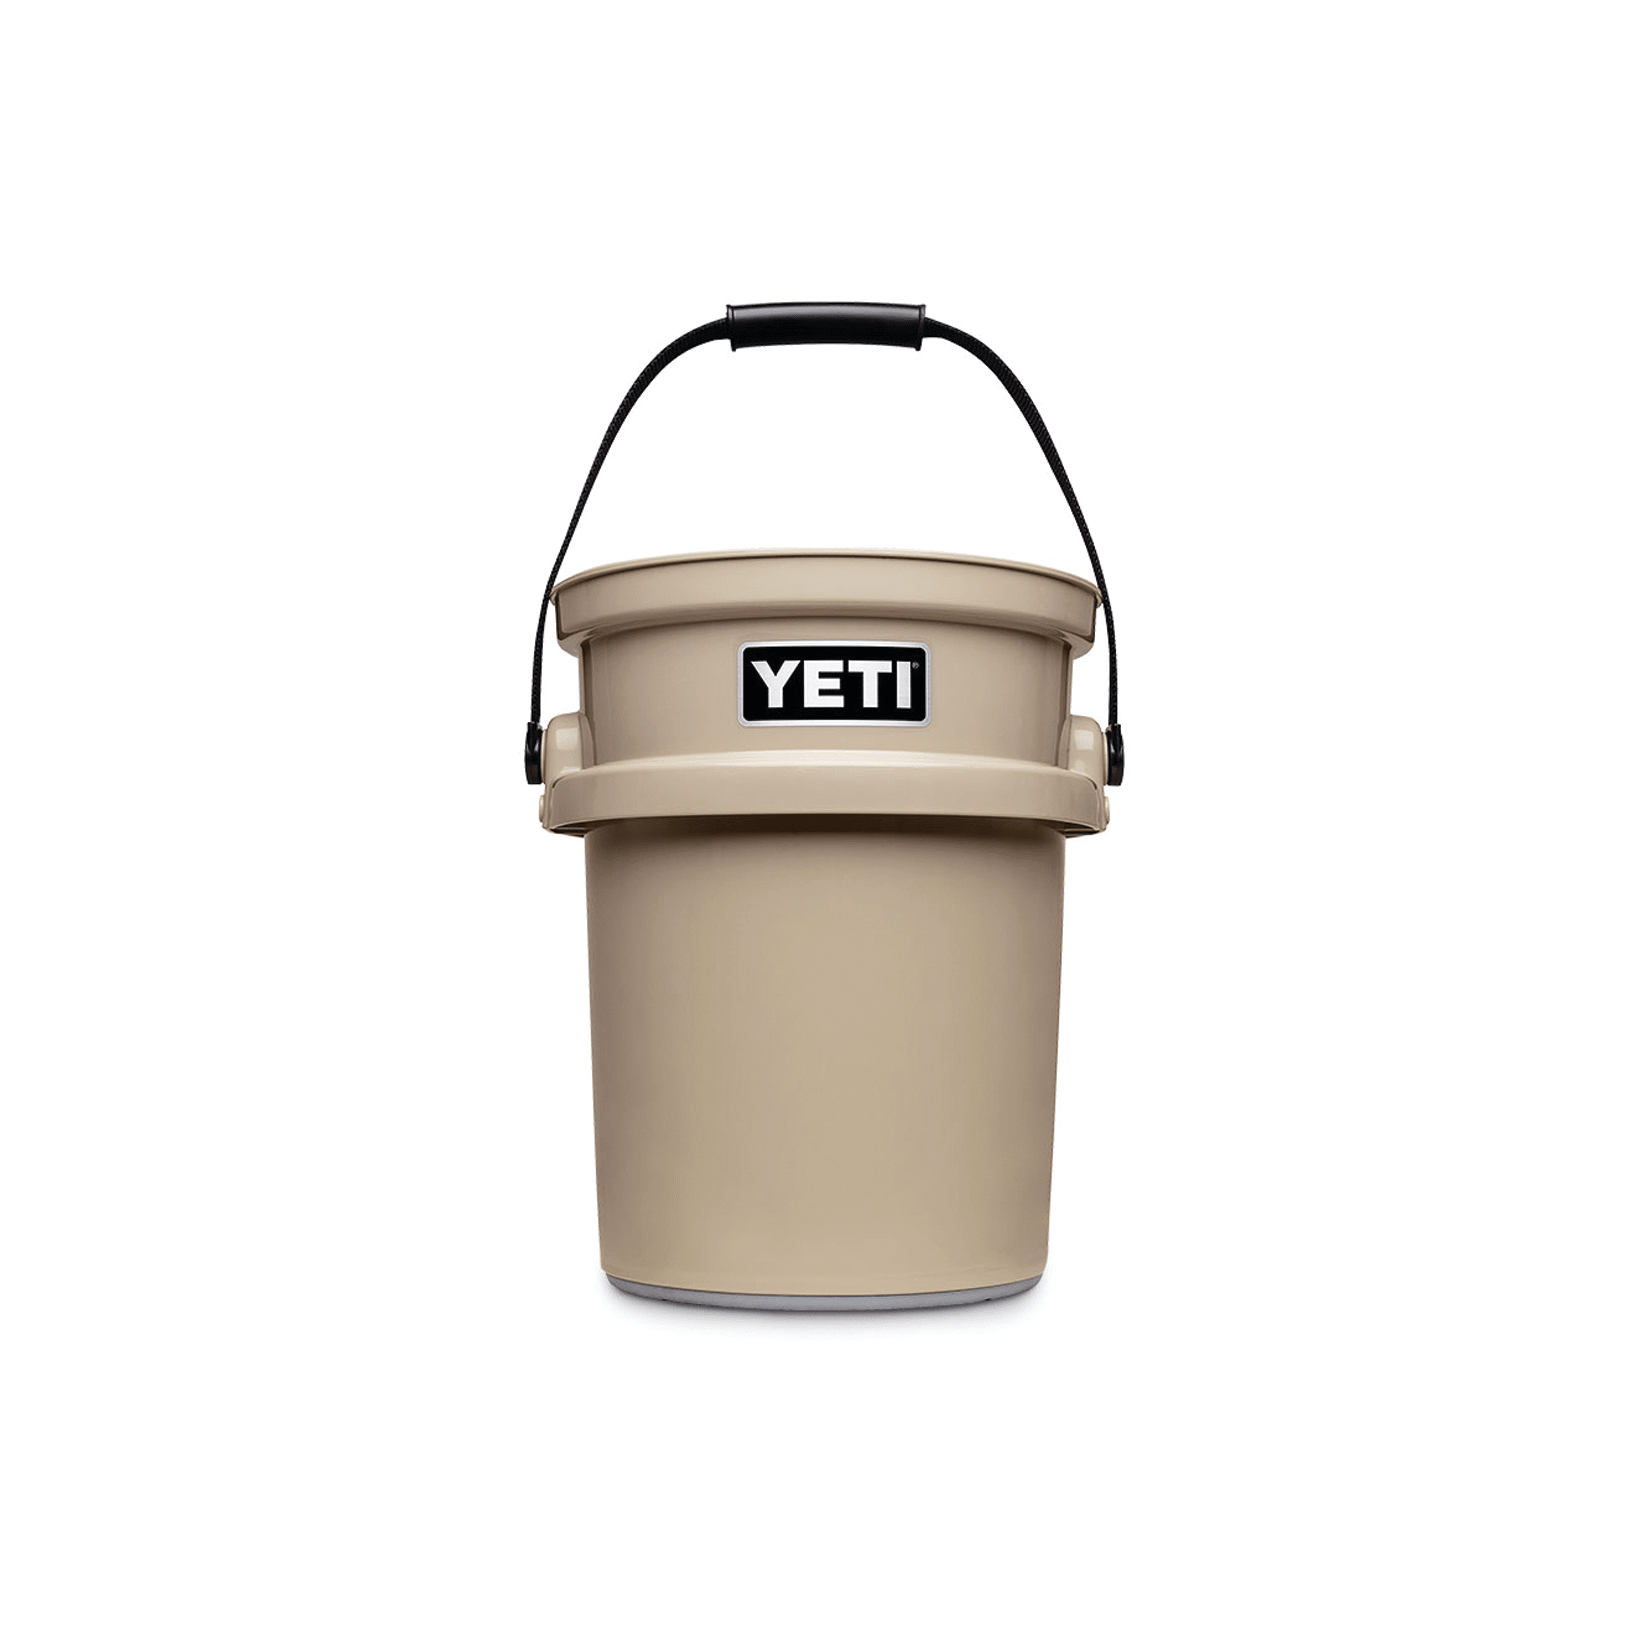 https://image.fisheriessupply.com/c_lpad,dpr_3.0,w_550,h_550,d_imageComingSoon-tiff/f_auto,q_auto/v1/static-images/yeti-coolers-loadout-5-gallon-work-bucket-tan